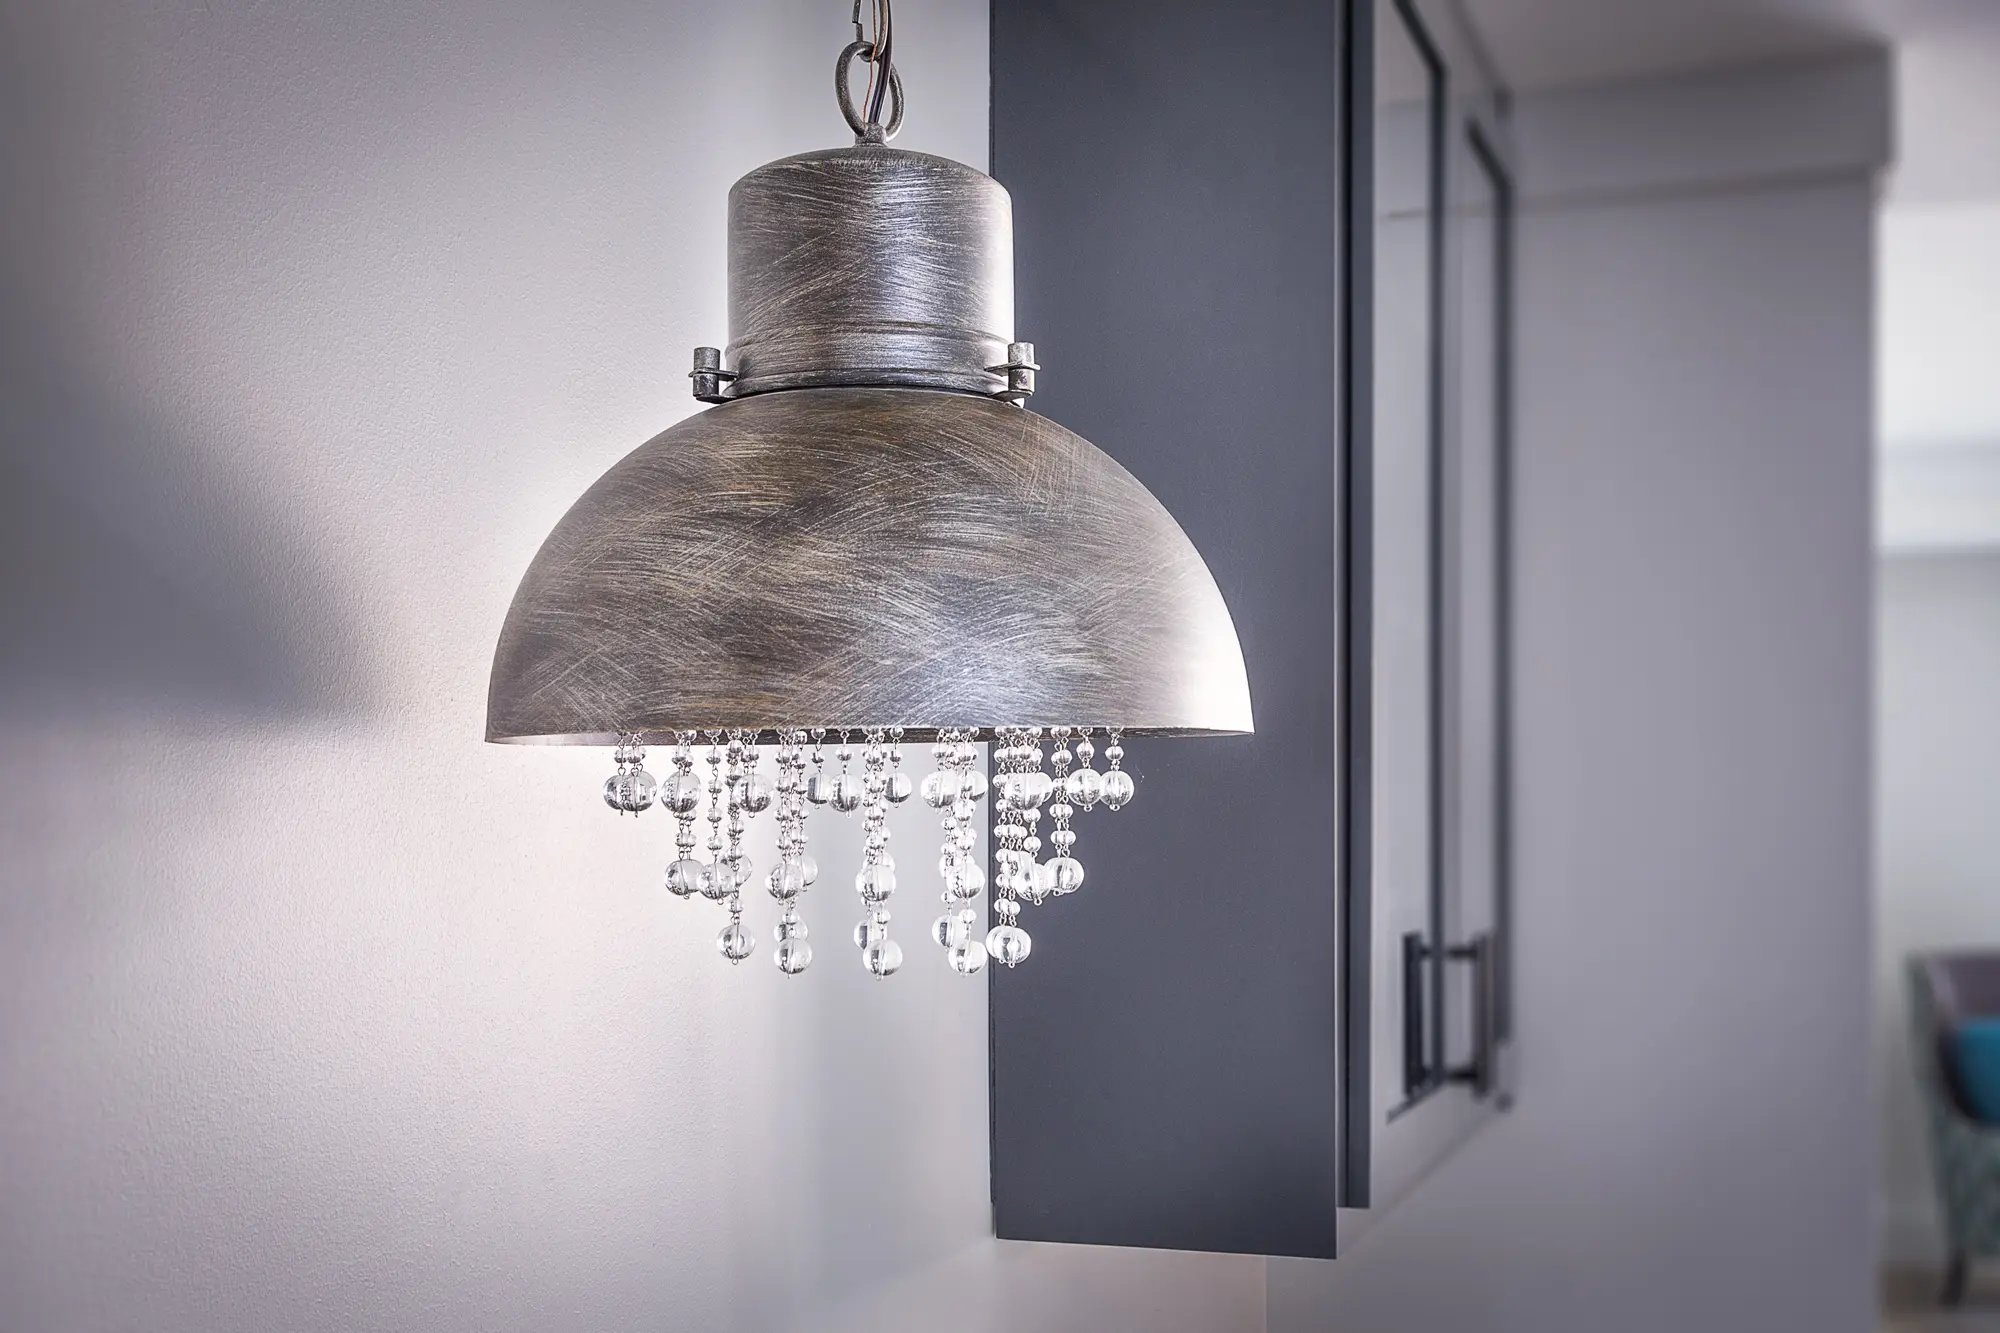 Stylish metal pendant light with crystal accents in a modern home interior